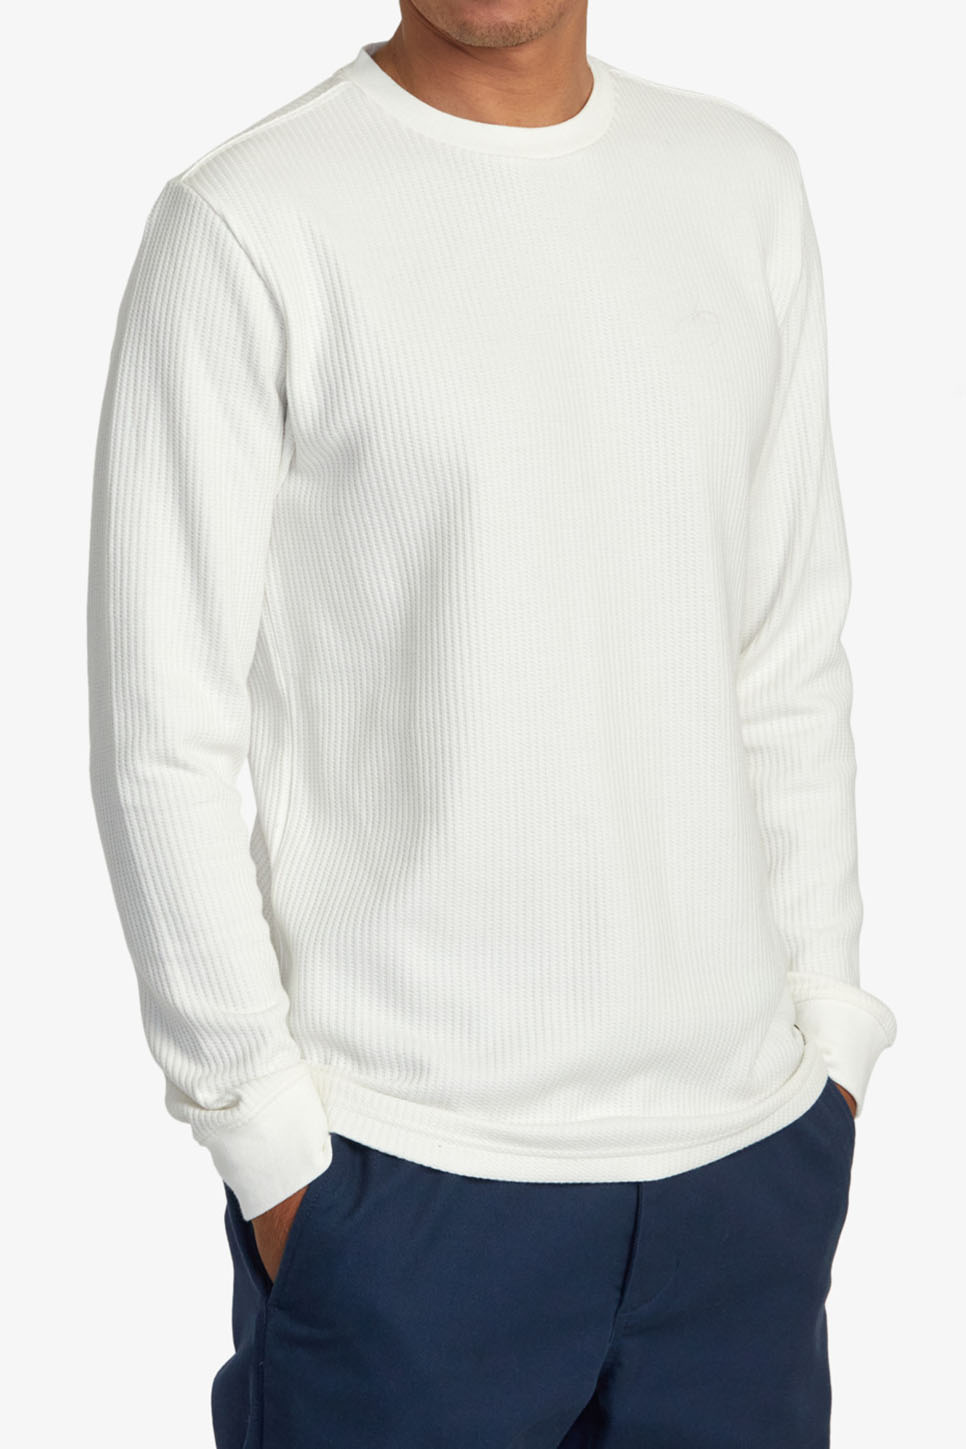 RVCA - Day Shift Thermal LS - Off White - Side